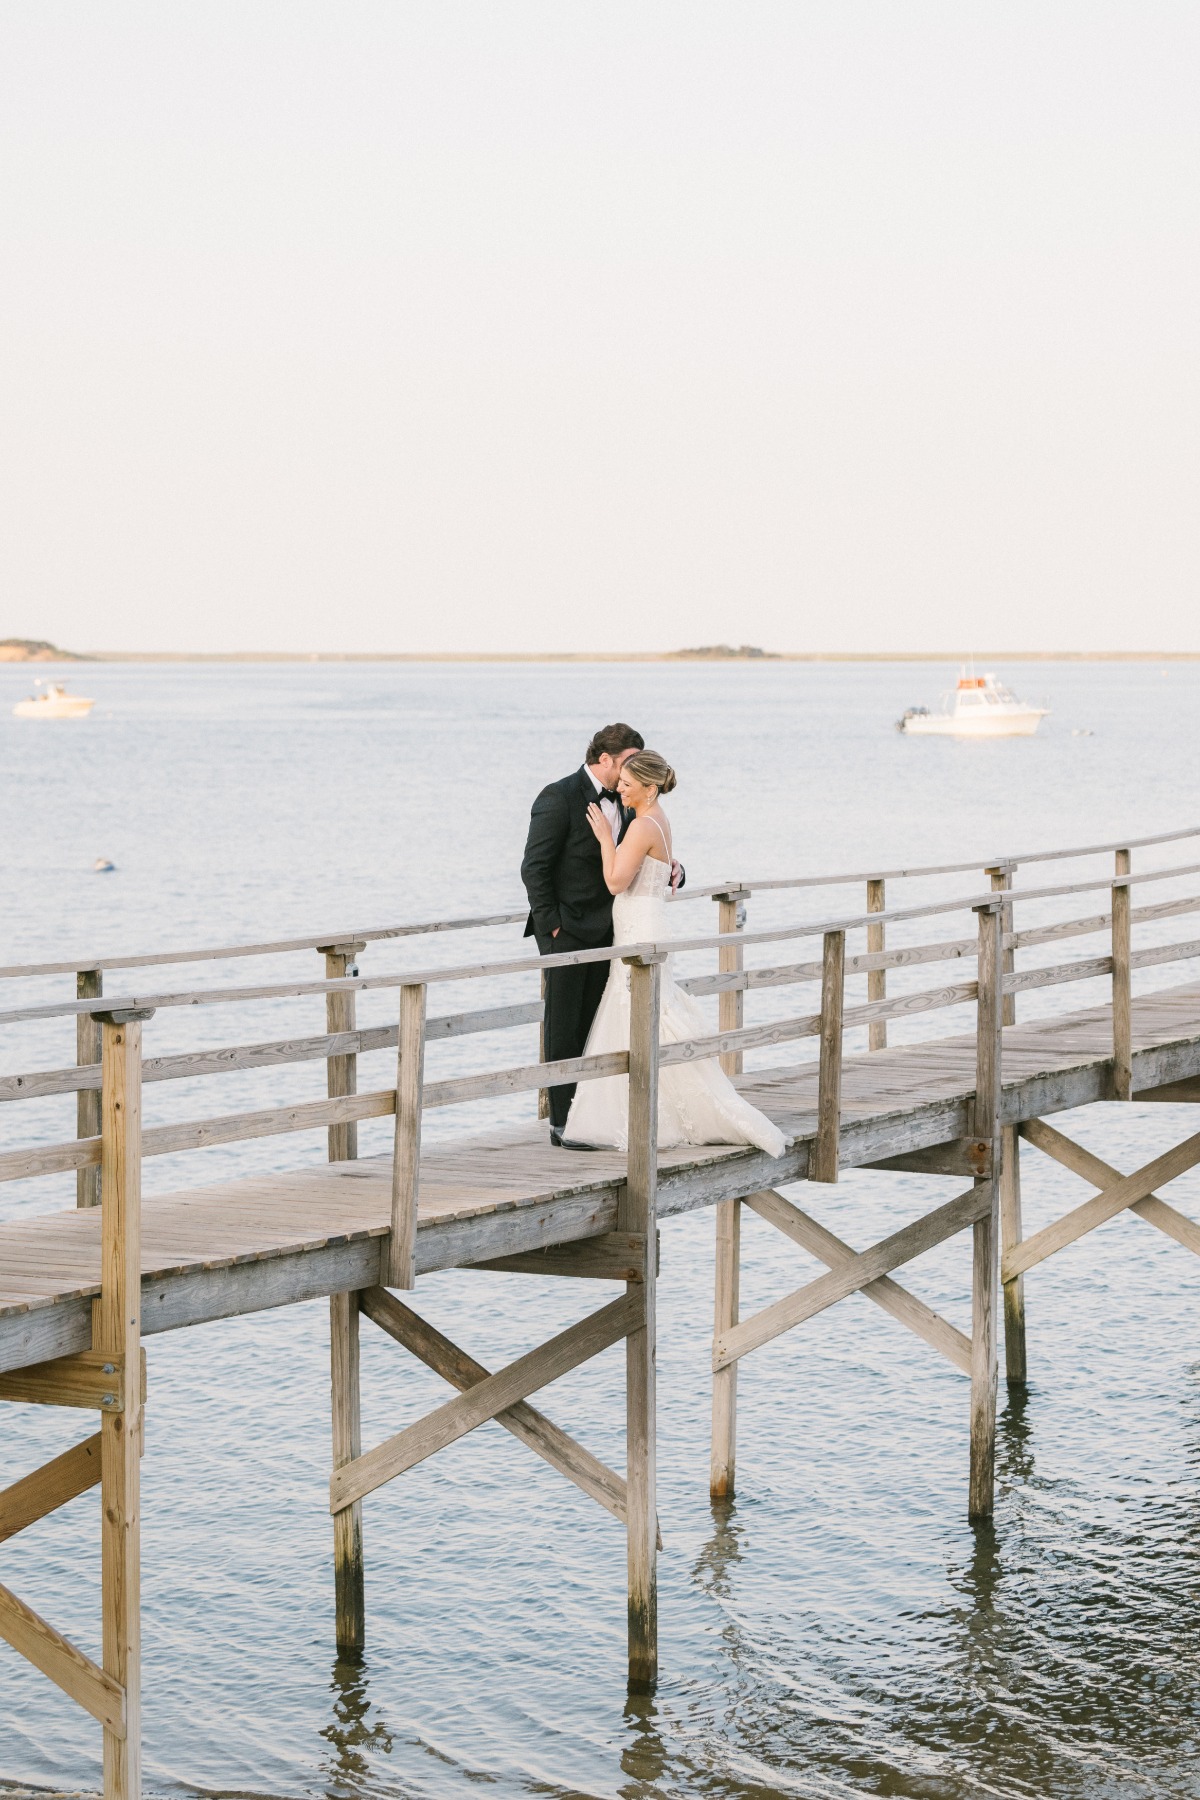 Cape Cod bride and groom wedding portraits on wooden pier